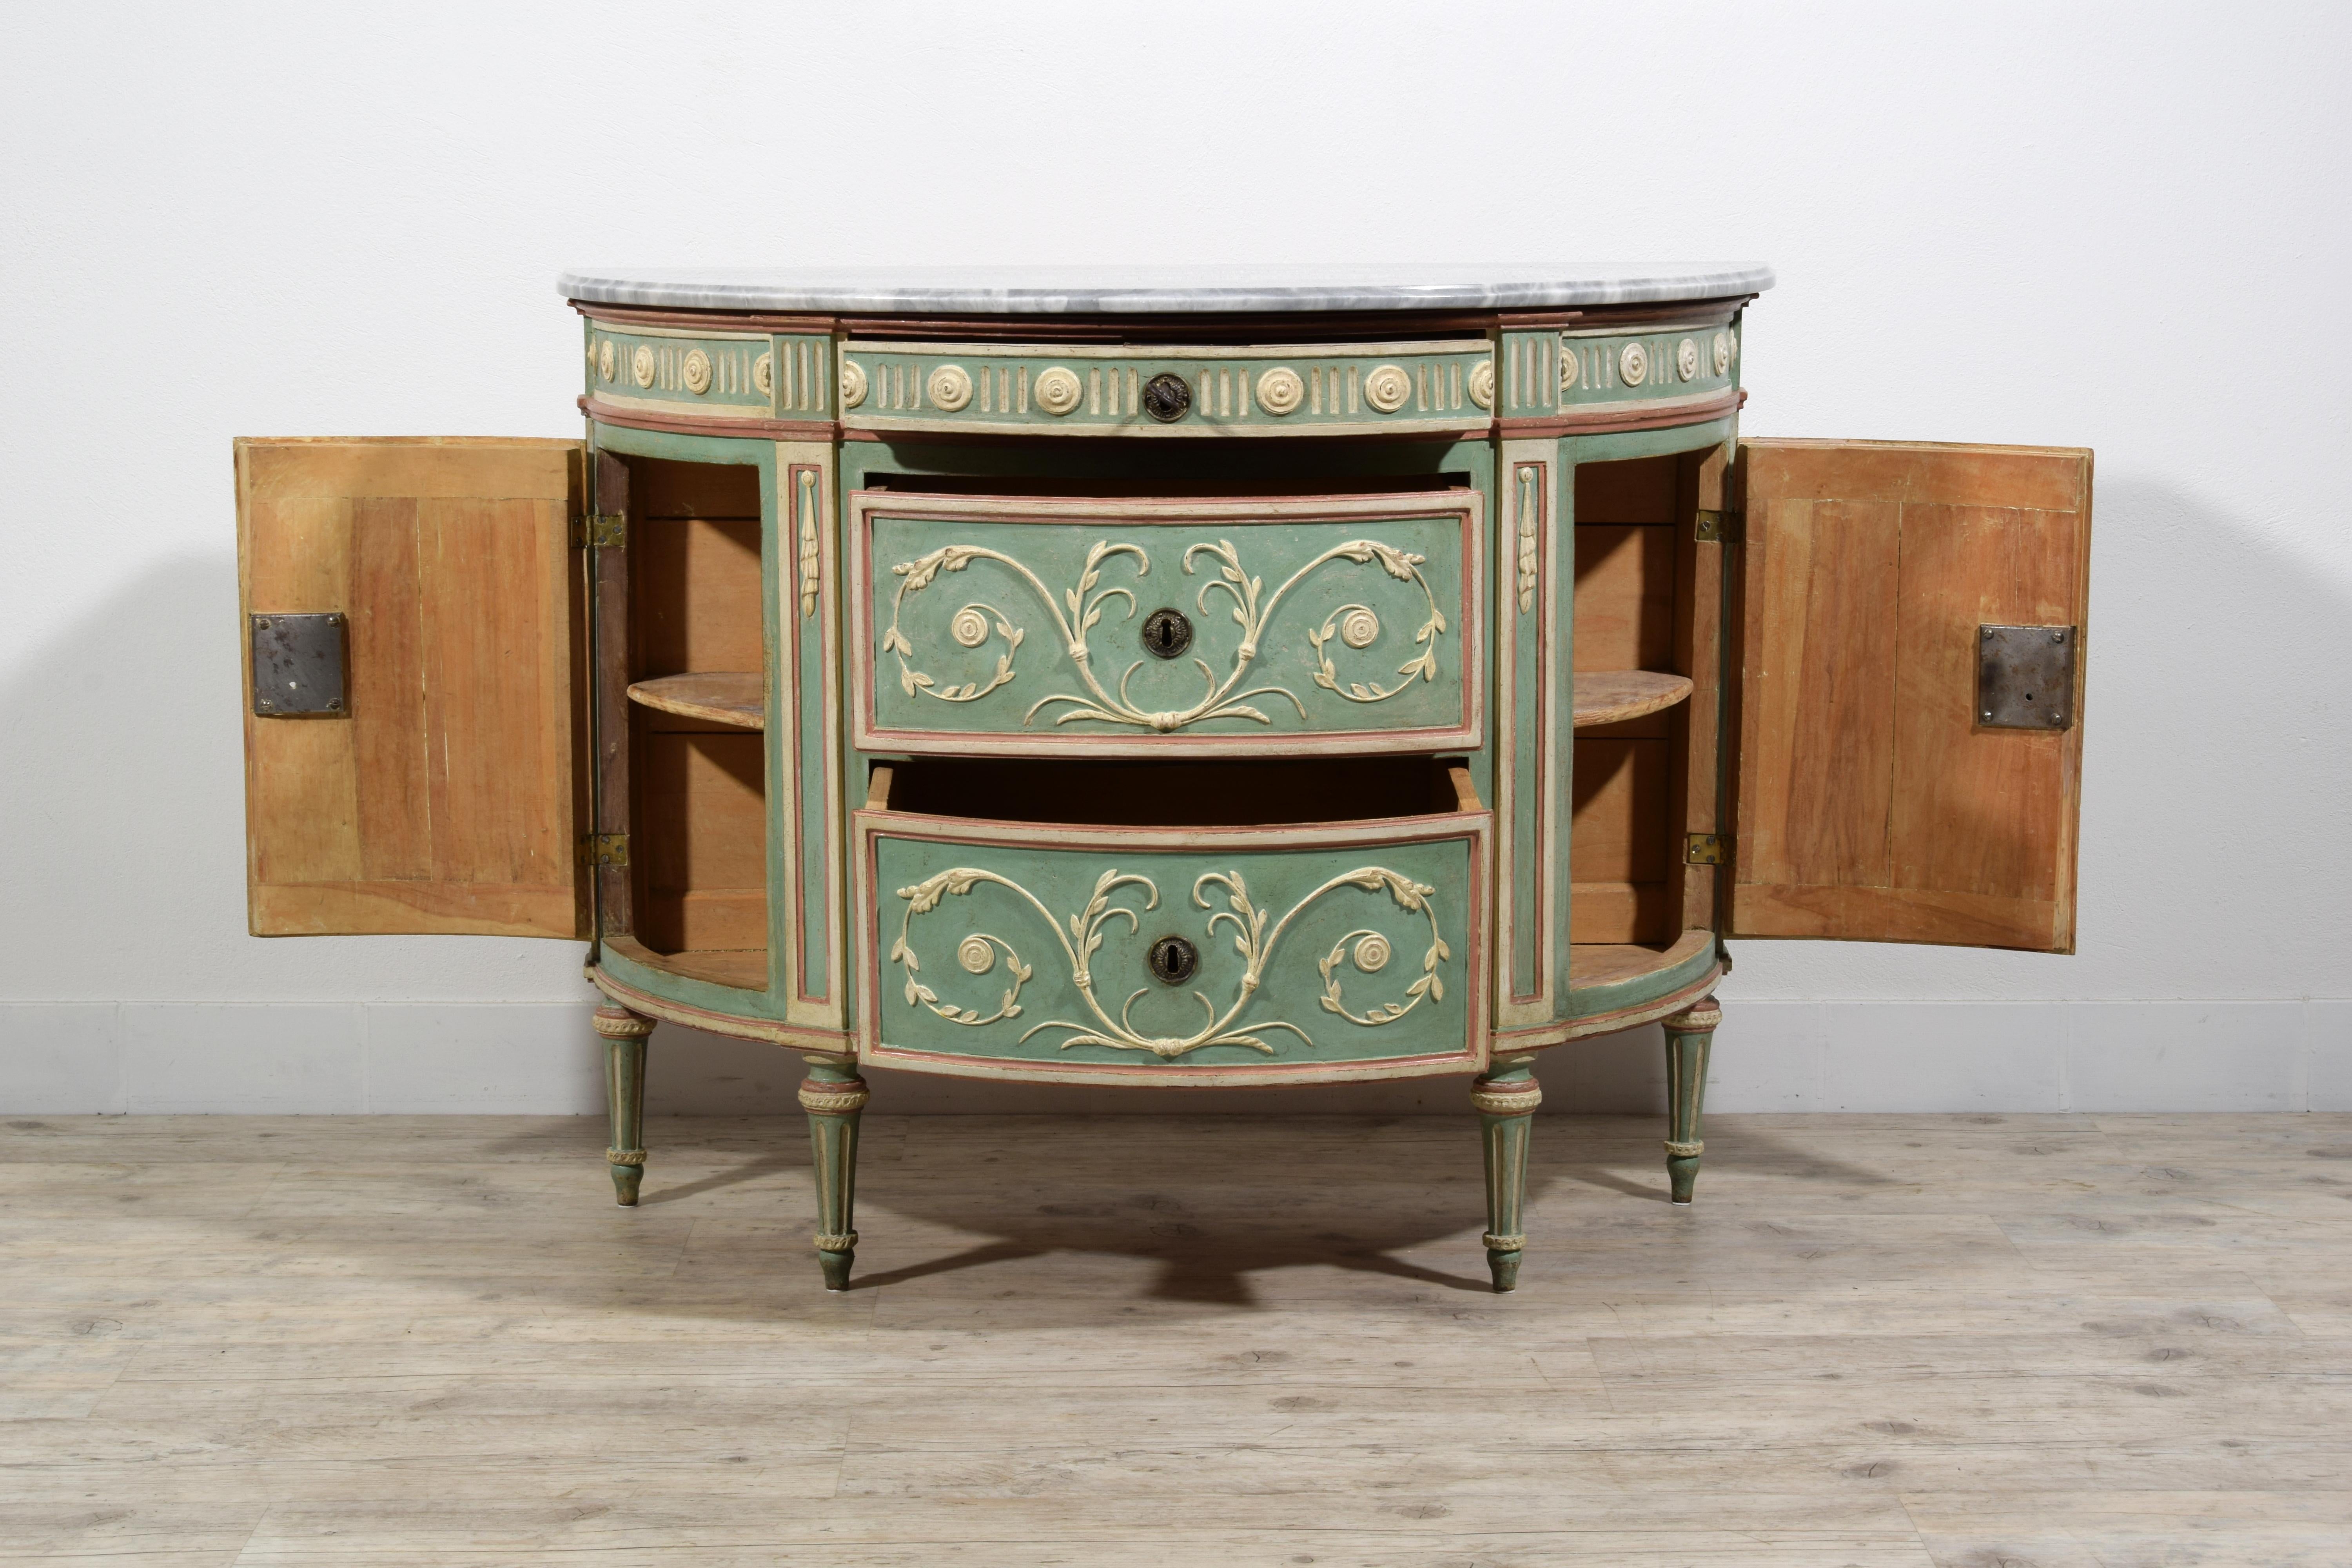 18th century, Italian Half-moon Lacquered Wood Chest of Drawers For Sale 2